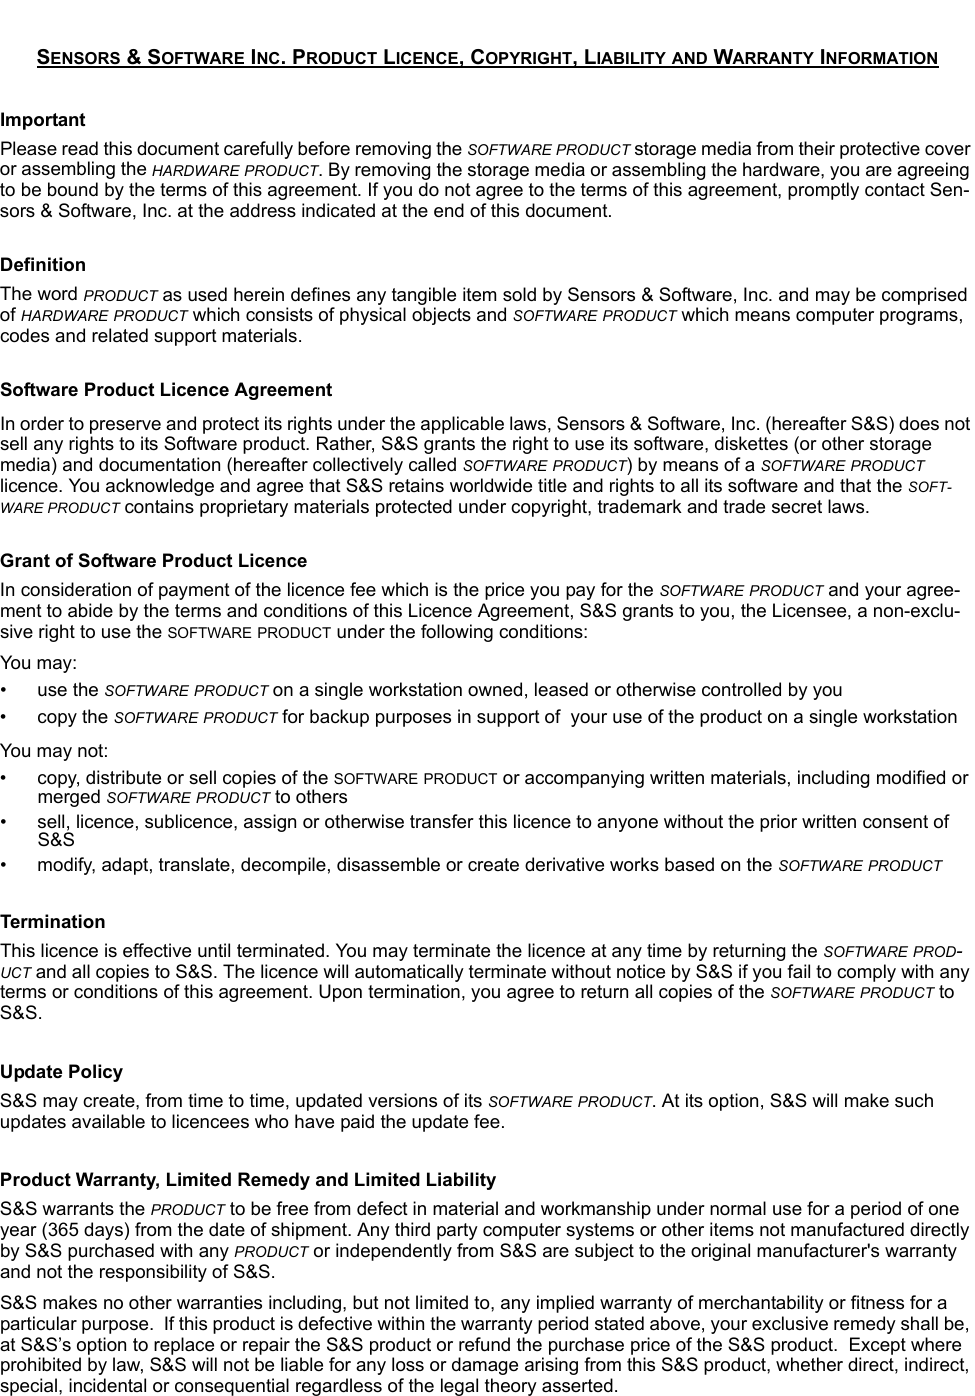 SENSORS &amp; SOFTWARE INC. PRODUCT LICENCE, COPYRIGHT, LIABILITY AND WARRANTY INFORMATIONImportantPlease read this document carefully before removing the SOFTWARE PRODUCT storage media from their protective cover or assembling the HARDWARE PRODUCT. By removing the storage media or assembling the hardware, you are agreeing to be bound by the terms of this agreement. If you do not agree to the terms of this agreement, promptly contact Sen-sors &amp; Software, Inc. at the address indicated at the end of this document.DefinitionThe word PRODUCT as used herein defines any tangible item sold by Sensors &amp; Software, Inc. and may be comprised of HARDWARE PRODUCT which consists of physical objects and SOFTWARE PRODUCT which means computer programs, codes and related support materials.Software Product Licence AgreementIn order to preserve and protect its rights under the applicable laws, Sensors &amp; Software, Inc. (hereafter S&amp;S) does not sell any rights to its Software product. Rather, S&amp;S grants the right to use its software, diskettes (or other storage media) and documentation (hereafter collectively called SOFTWARE PRODUCT) by means of a SOFTWARE PRODUCT licence. You acknowledge and agree that S&amp;S retains worldwide title and rights to all its software and that the SOFT-WARE PRODUCT contains proprietary materials protected under copyright, trademark and trade secret laws.Grant of Software Product LicenceIn consideration of payment of the licence fee which is the price you pay for the SOFTWARE PRODUCT and your agree-ment to abide by the terms and conditions of this Licence Agreement, S&amp;S grants to you, the Licensee, a non-exclu-sive right to use the SOFTWARE PRODUCT under the following conditions:You  may:• use the SOFTWARE PRODUCT on a single workstation owned, leased or otherwise controlled by you• copy the SOFTWARE PRODUCT for backup purposes in support of  your use of the product on a single workstationYou may not:• copy, distribute or sell copies of the SOFTWARE PRODUCT or accompanying written materials, including modified or merged SOFTWARE PRODUCT to others• sell, licence, sublicence, assign or otherwise transfer this licence to anyone without the prior written consent of S&amp;S• modify, adapt, translate, decompile, disassemble or create derivative works based on the SOFTWARE PRODUCTTerminationThis licence is effective until terminated. You may terminate the licence at any time by returning the SOFTWARE PROD-UCT and all copies to S&amp;S. The licence will automatically terminate without notice by S&amp;S if you fail to comply with any terms or conditions of this agreement. Upon termination, you agree to return all copies of the SOFTWARE PRODUCT to S&amp;S.Update PolicyS&amp;S may create, from time to time, updated versions of its SOFTWARE PRODUCT. At its option, S&amp;S will make such updates available to licencees who have paid the update fee.Product Warranty, Limited Remedy and Limited Liability S&amp;S warrants the PRODUCT to be free from defect in material and workmanship under normal use for a period of one year (365 days) from the date of shipment. Any third party computer systems or other items not manufactured directly by S&amp;S purchased with any PRODUCT or independently from S&amp;S are subject to the original manufacturer&apos;s warranty and not the responsibility of S&amp;S.S&amp;S makes no other warranties including, but not limited to, any implied warranty of merchantability or fitness for a particular purpose.  If this product is defective within the warranty period stated above, your exclusive remedy shall be, at S&amp;S’s option to replace or repair the S&amp;S product or refund the purchase price of the S&amp;S product.  Except where prohibited by law, S&amp;S will not be liable for any loss or damage arising from this S&amp;S product, whether direct, indirect, special, incidental or consequential regardless of the legal theory asserted.